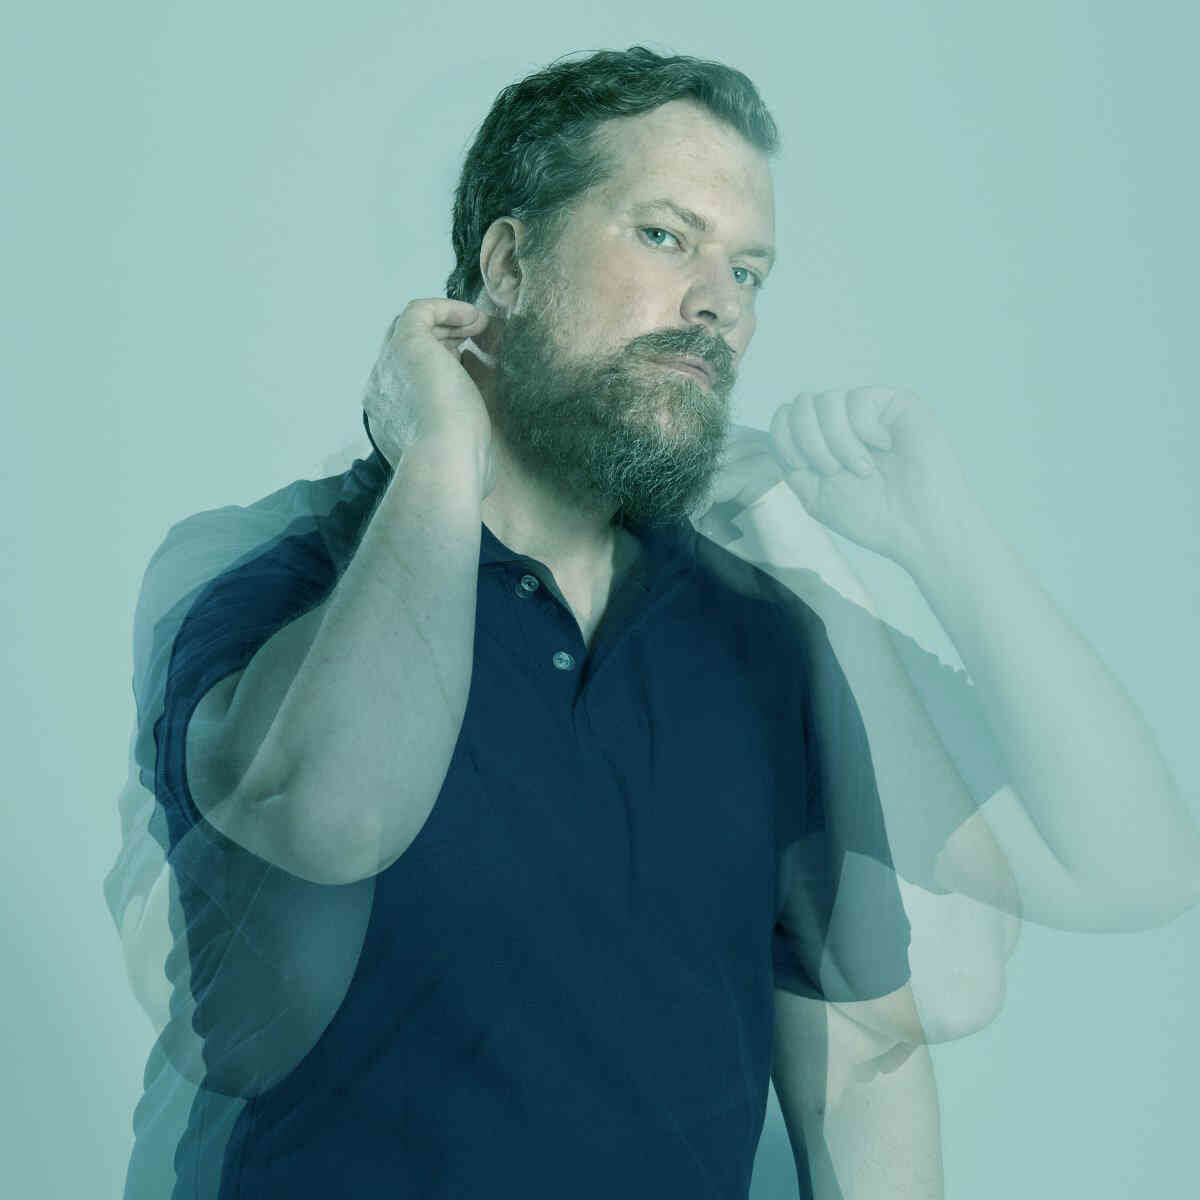 Behind the Synth, John Grant’s Soul